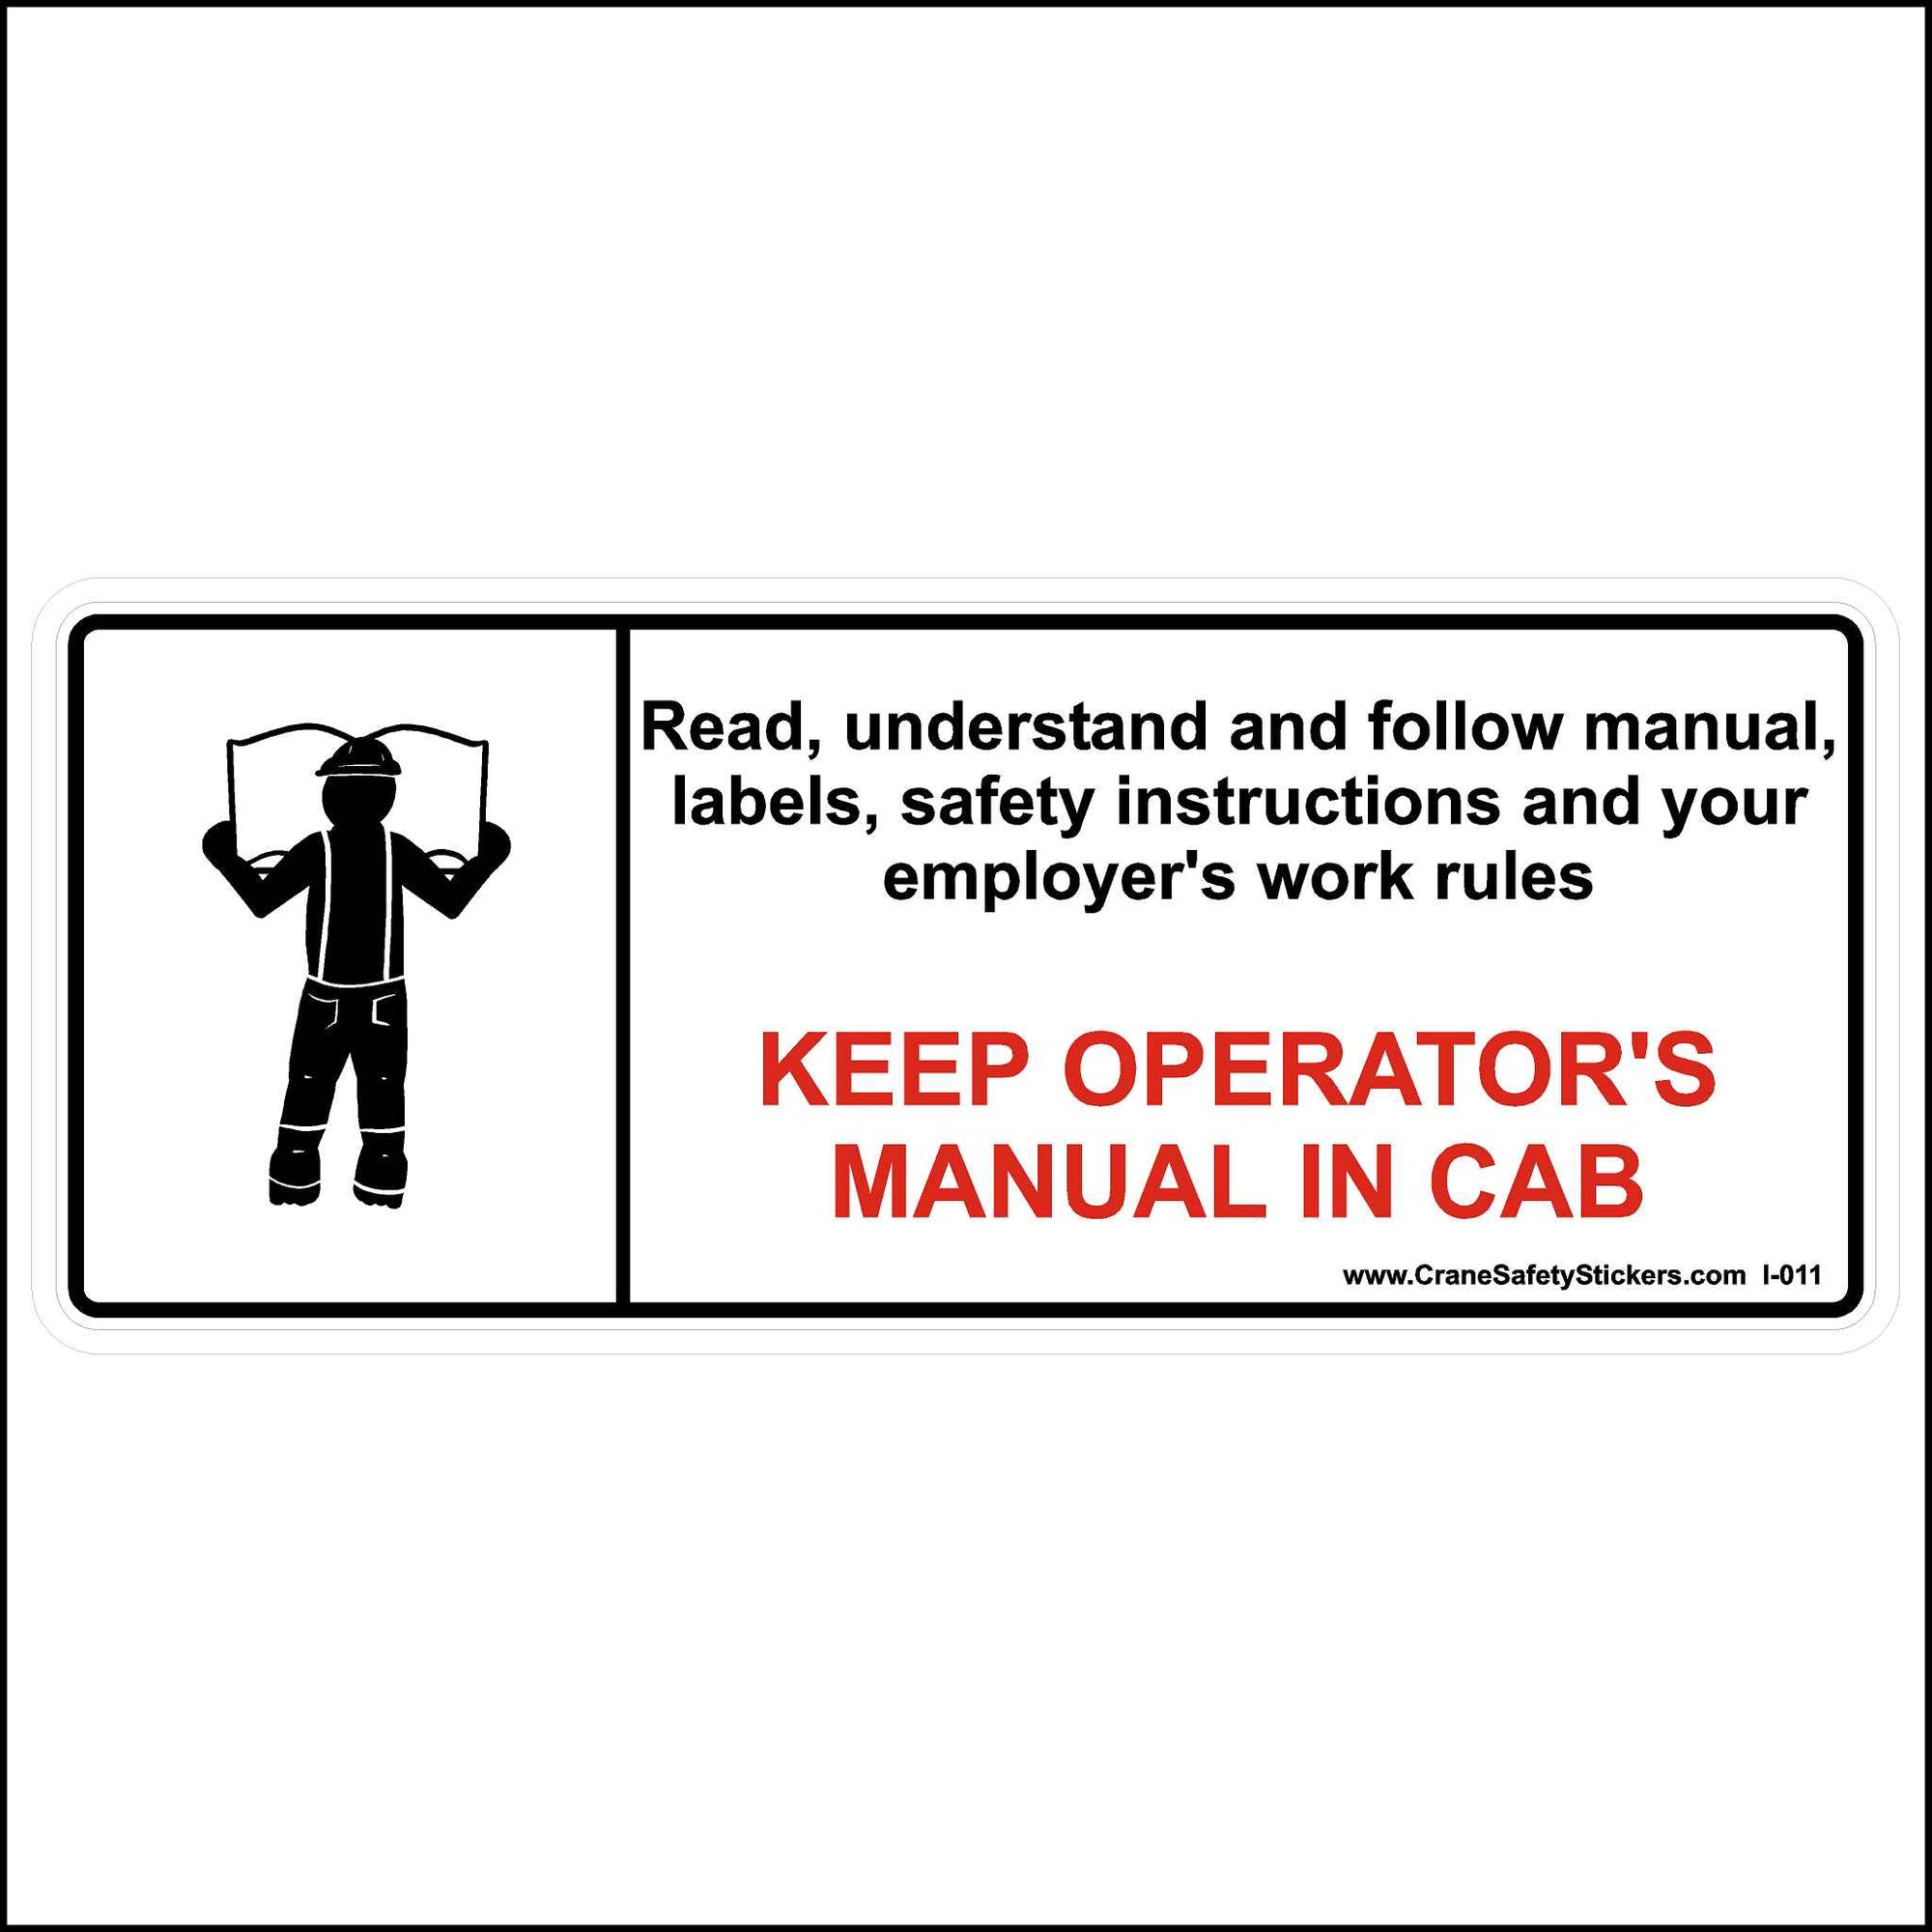 Keep Operators Manual in Cab Sticker Printed With. Keep Operator's Manual In Cab Read, understand, and follow the manual, labels, safety instructions, and your employer's work rules. Printed in black and red on a white background.